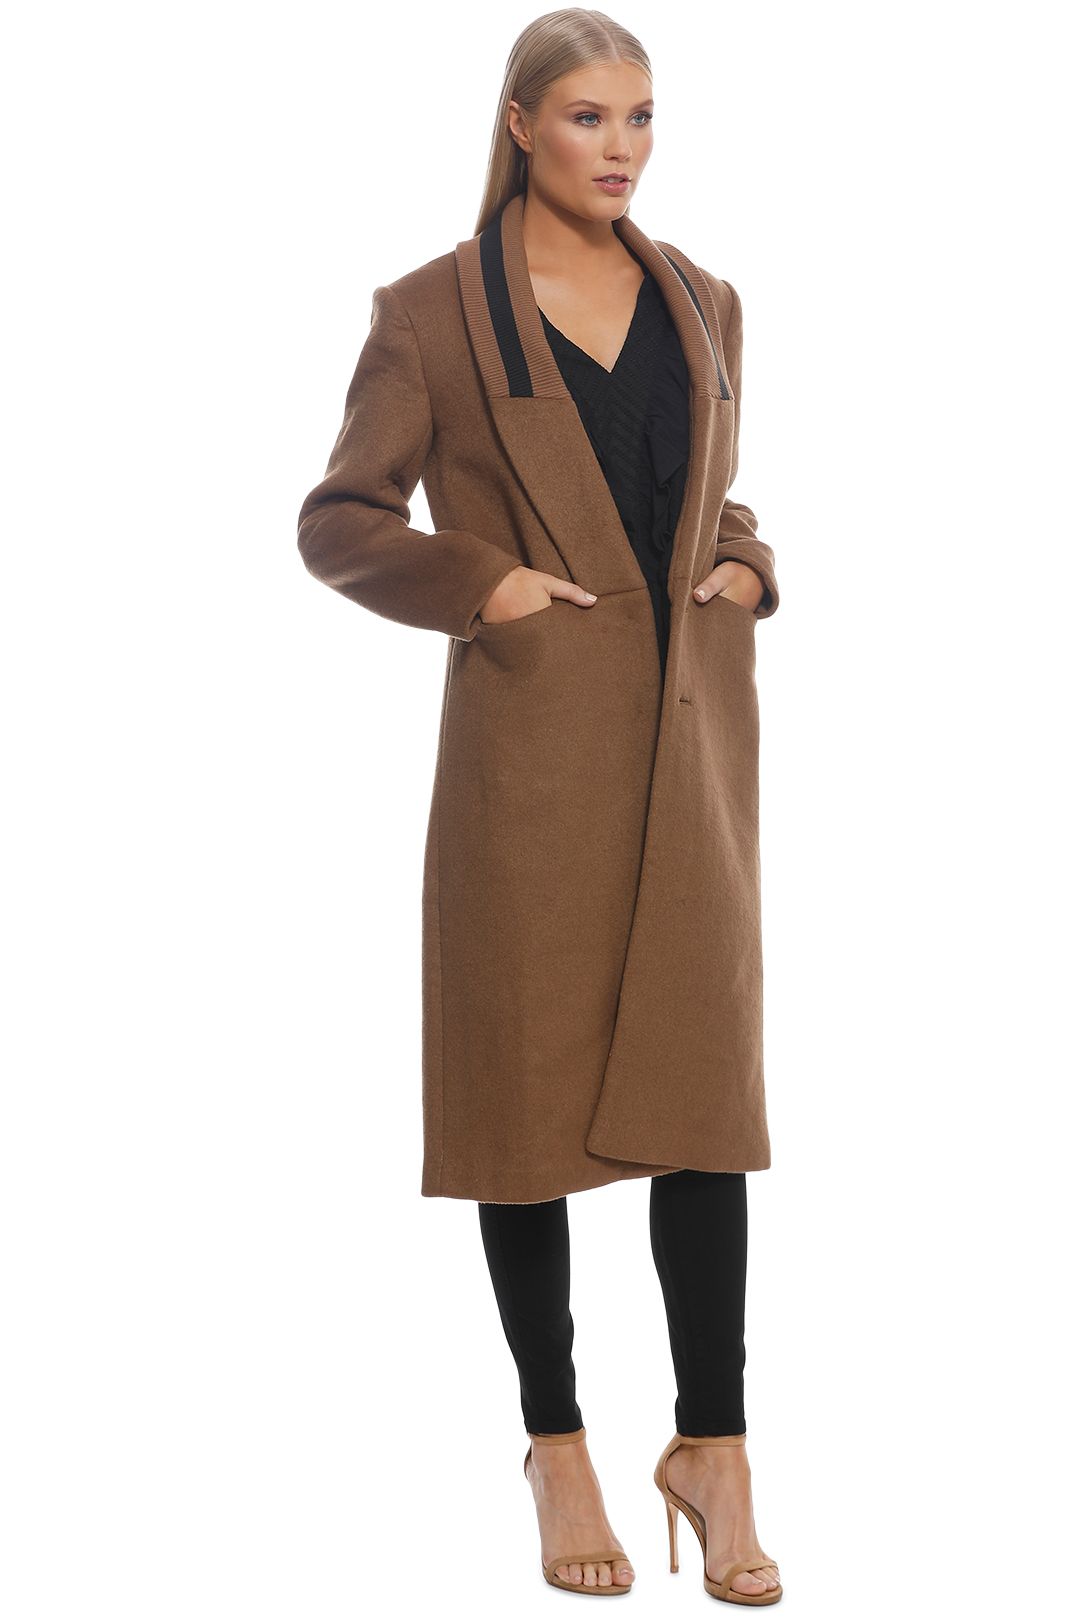 CMEO Collective - Duality Coat - Tan - Side